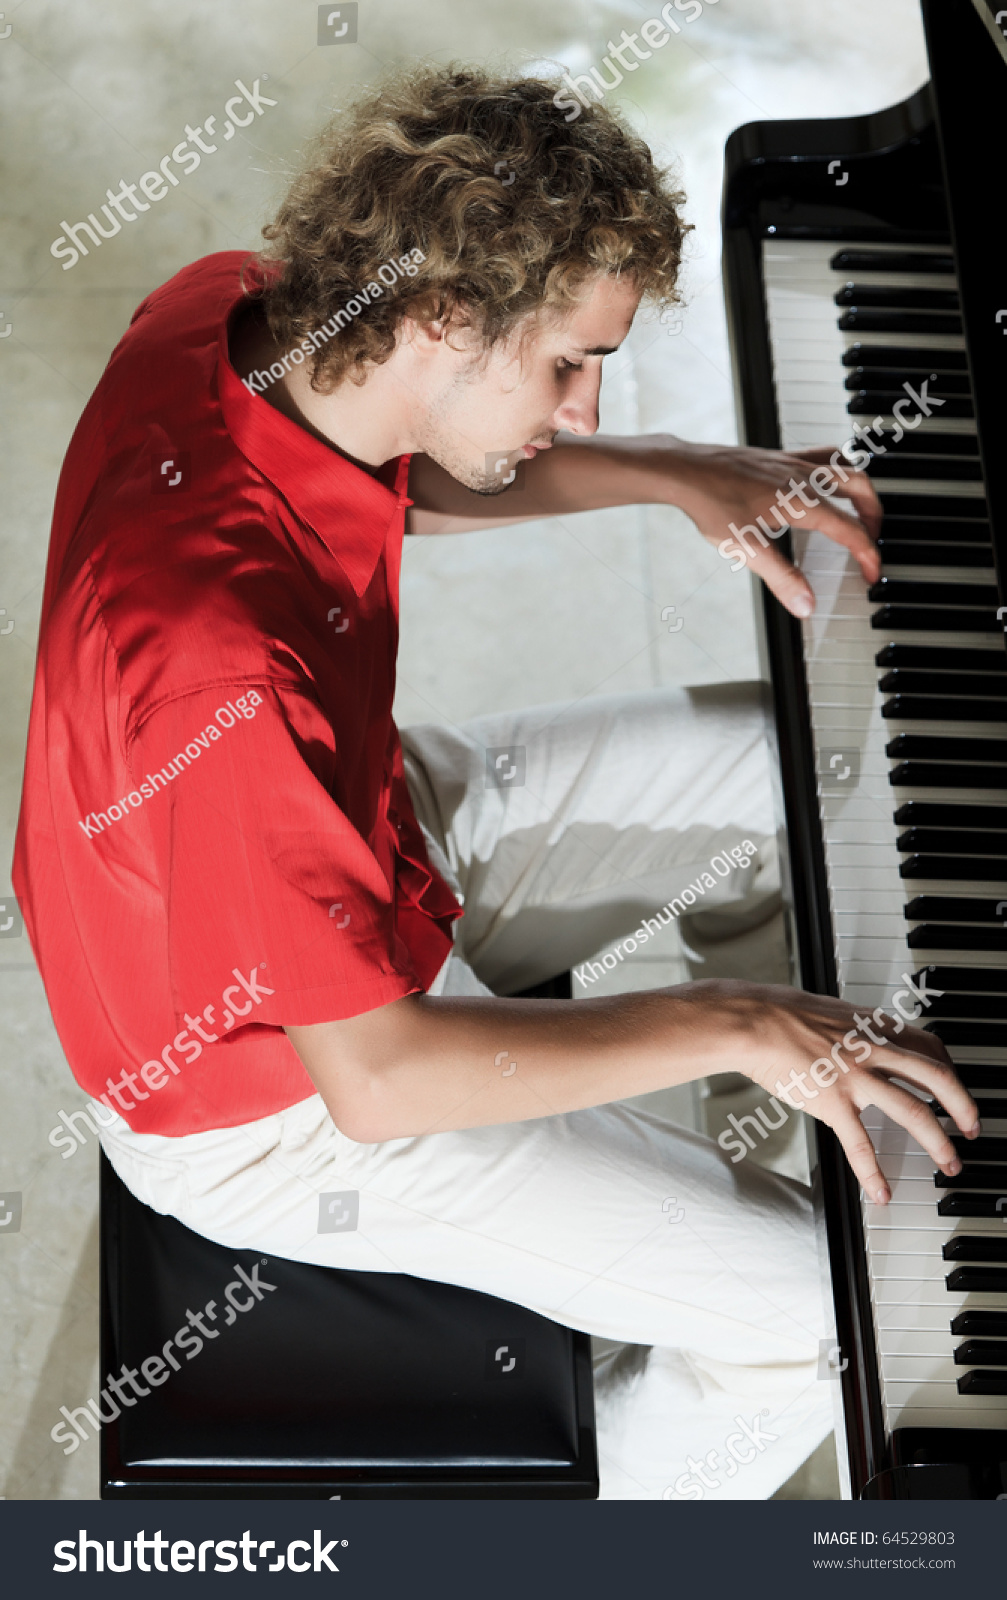 Handsome Man Photo With Piano 101